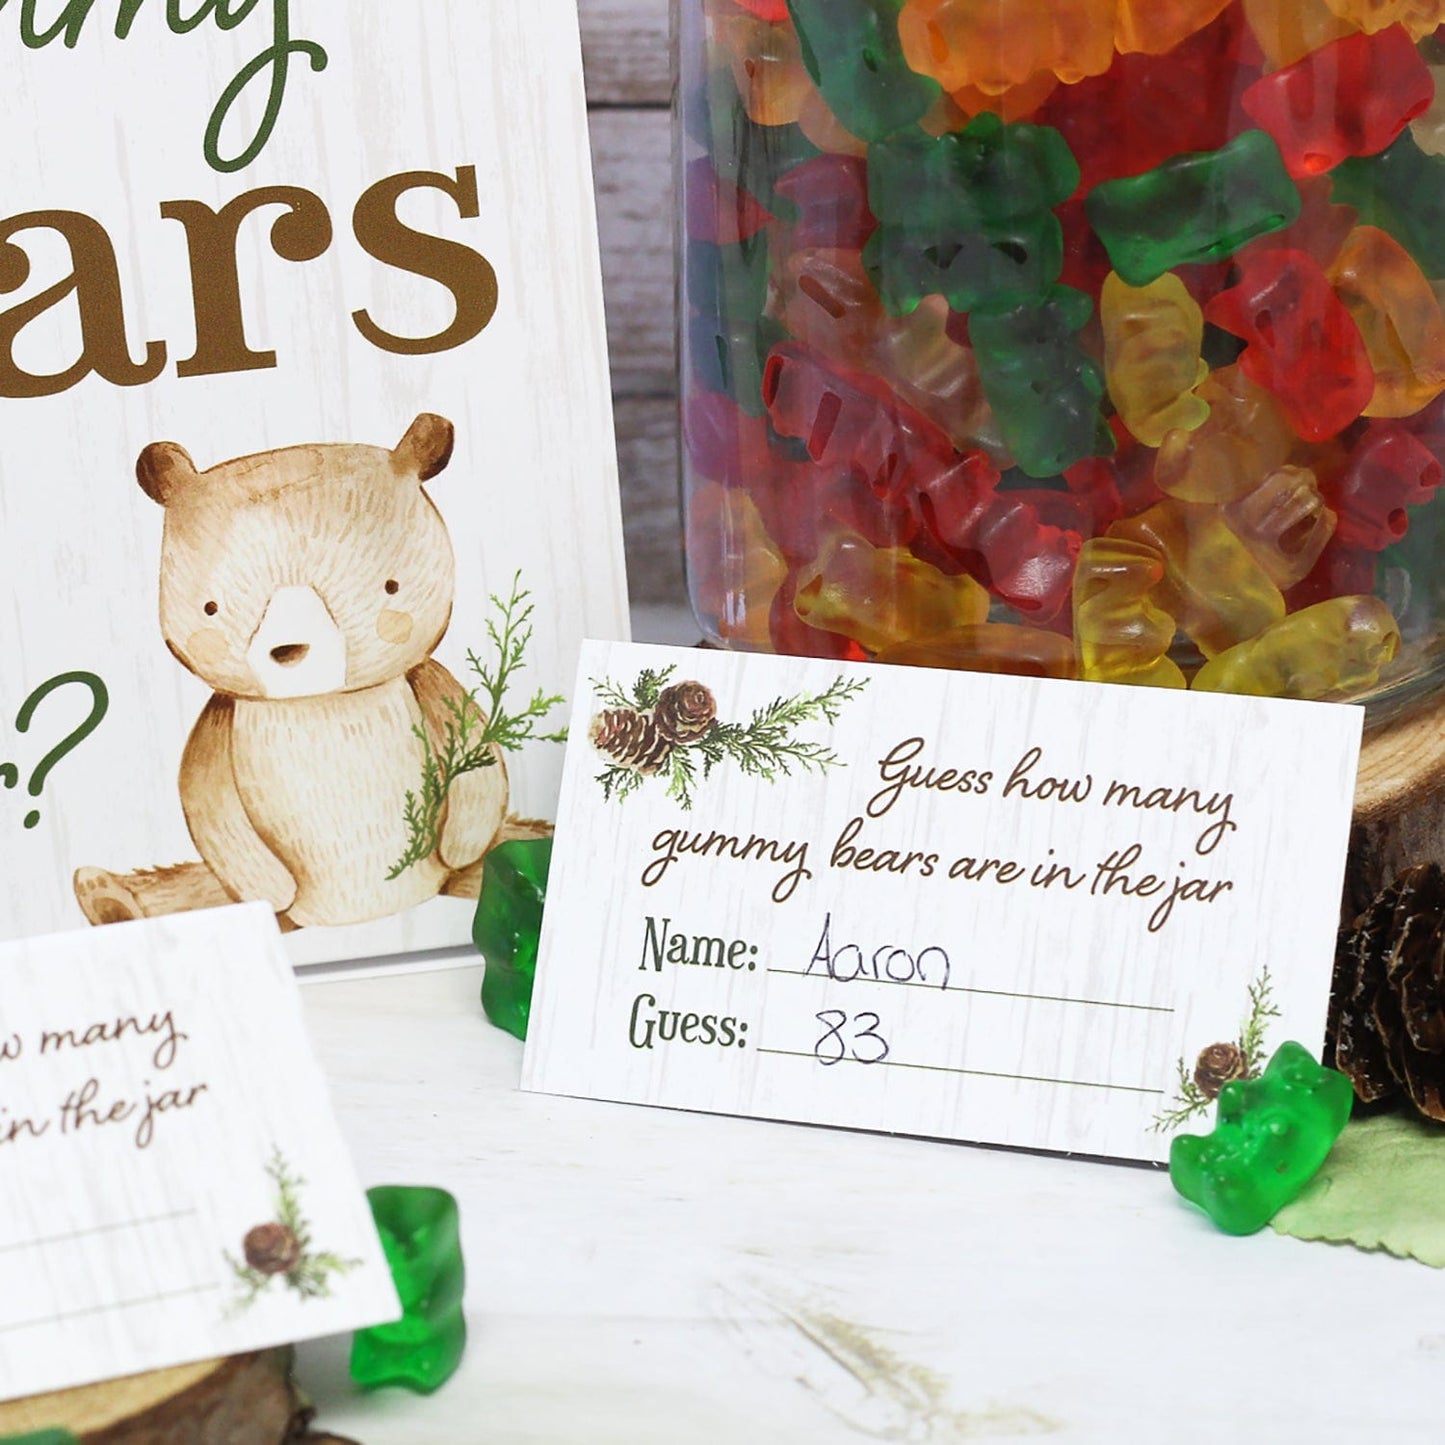 How Many Gummy Bears Woodland Baby Shower Game